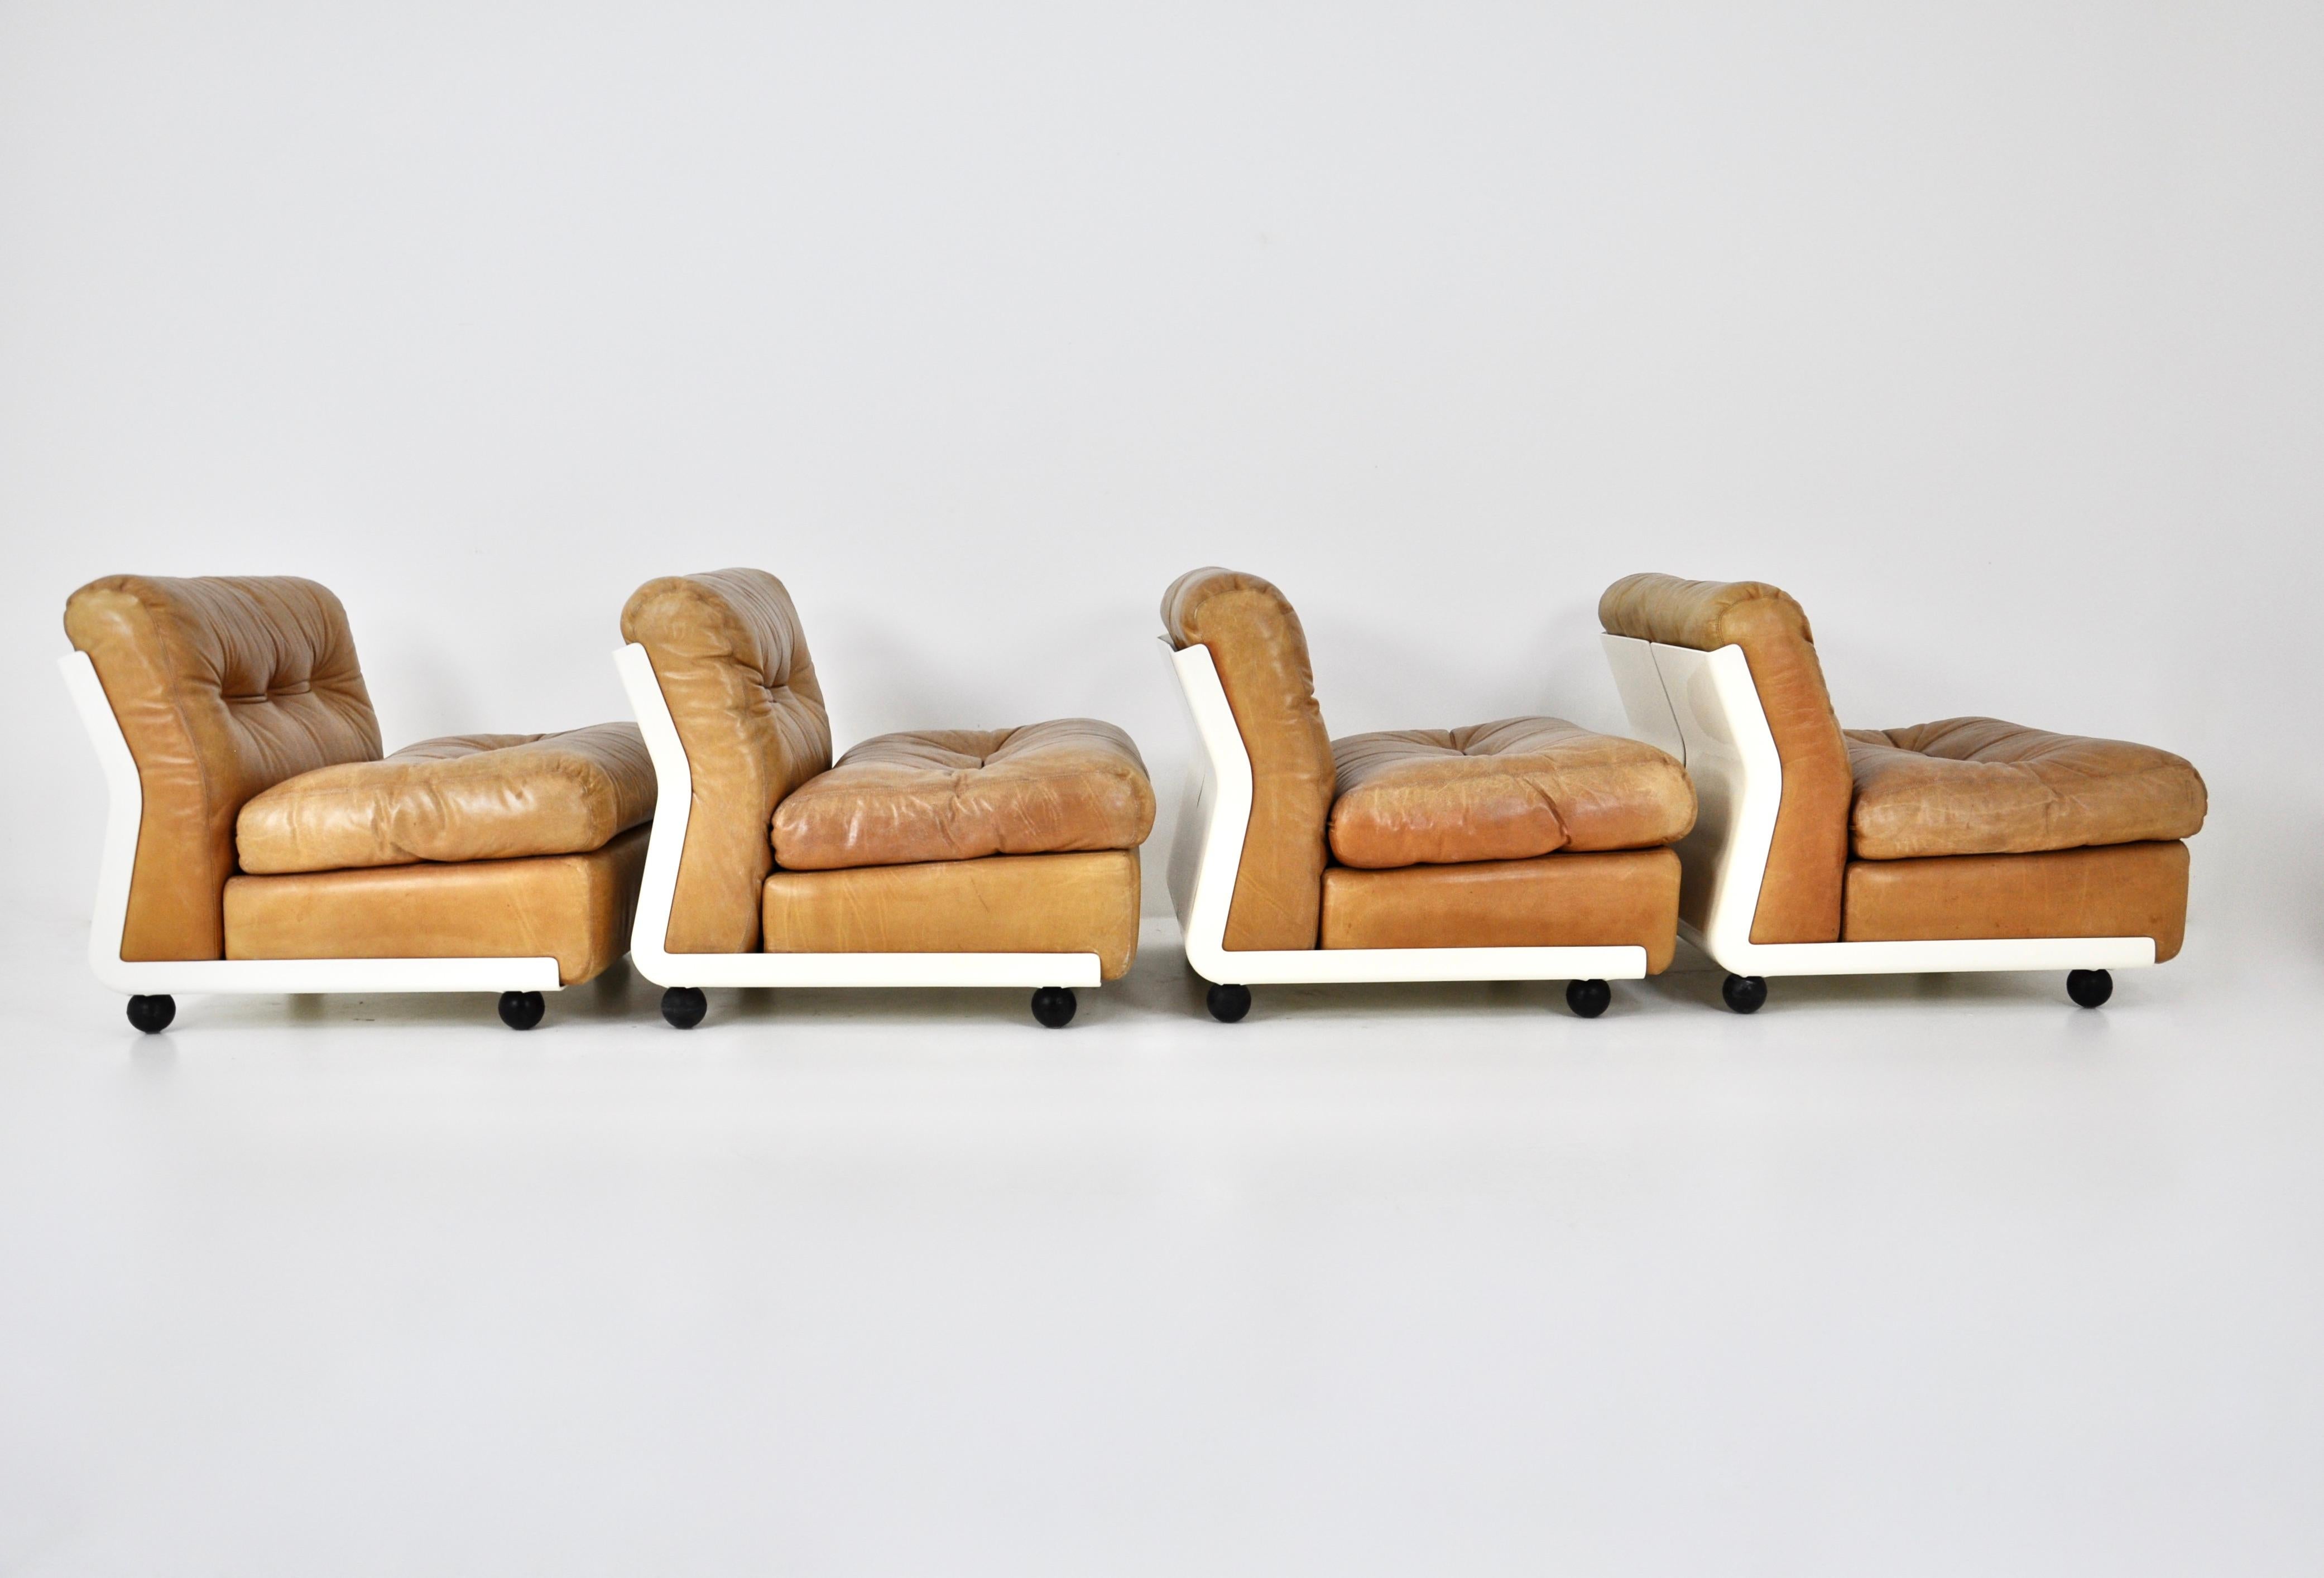 Mid-20th Century Amanta Lounge chairs by Mario Bellini for C&B Italia, 1960s set of 4